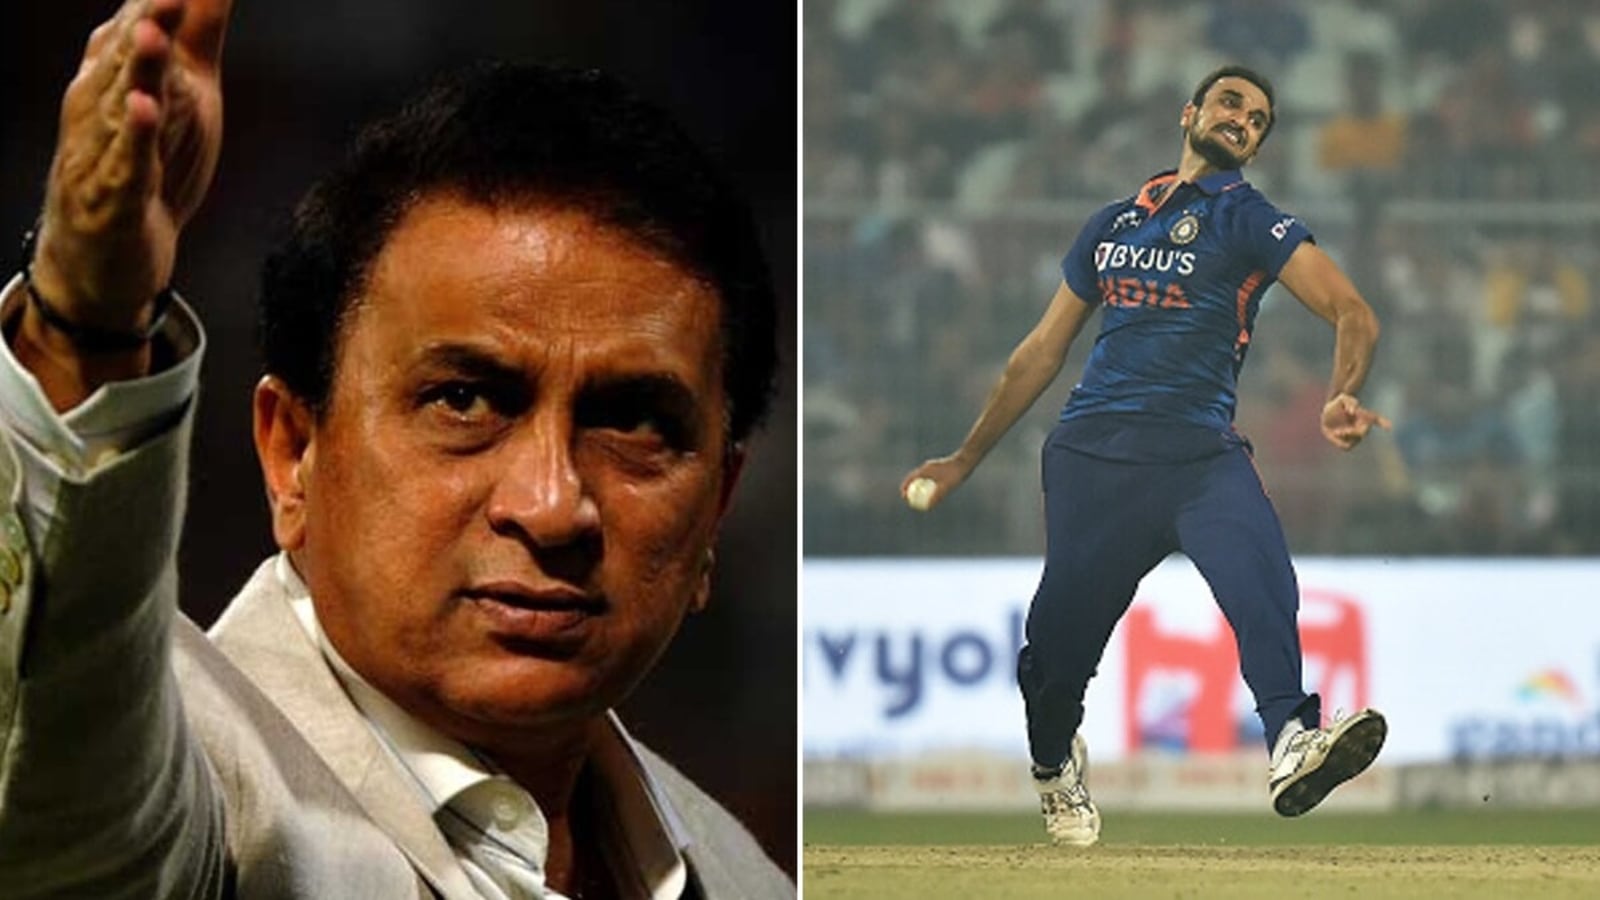 yaar-pehle-match-toh-hone-do-how-can-you-decide-already-gavaskar-fumes-at-question-about-harshal-patel